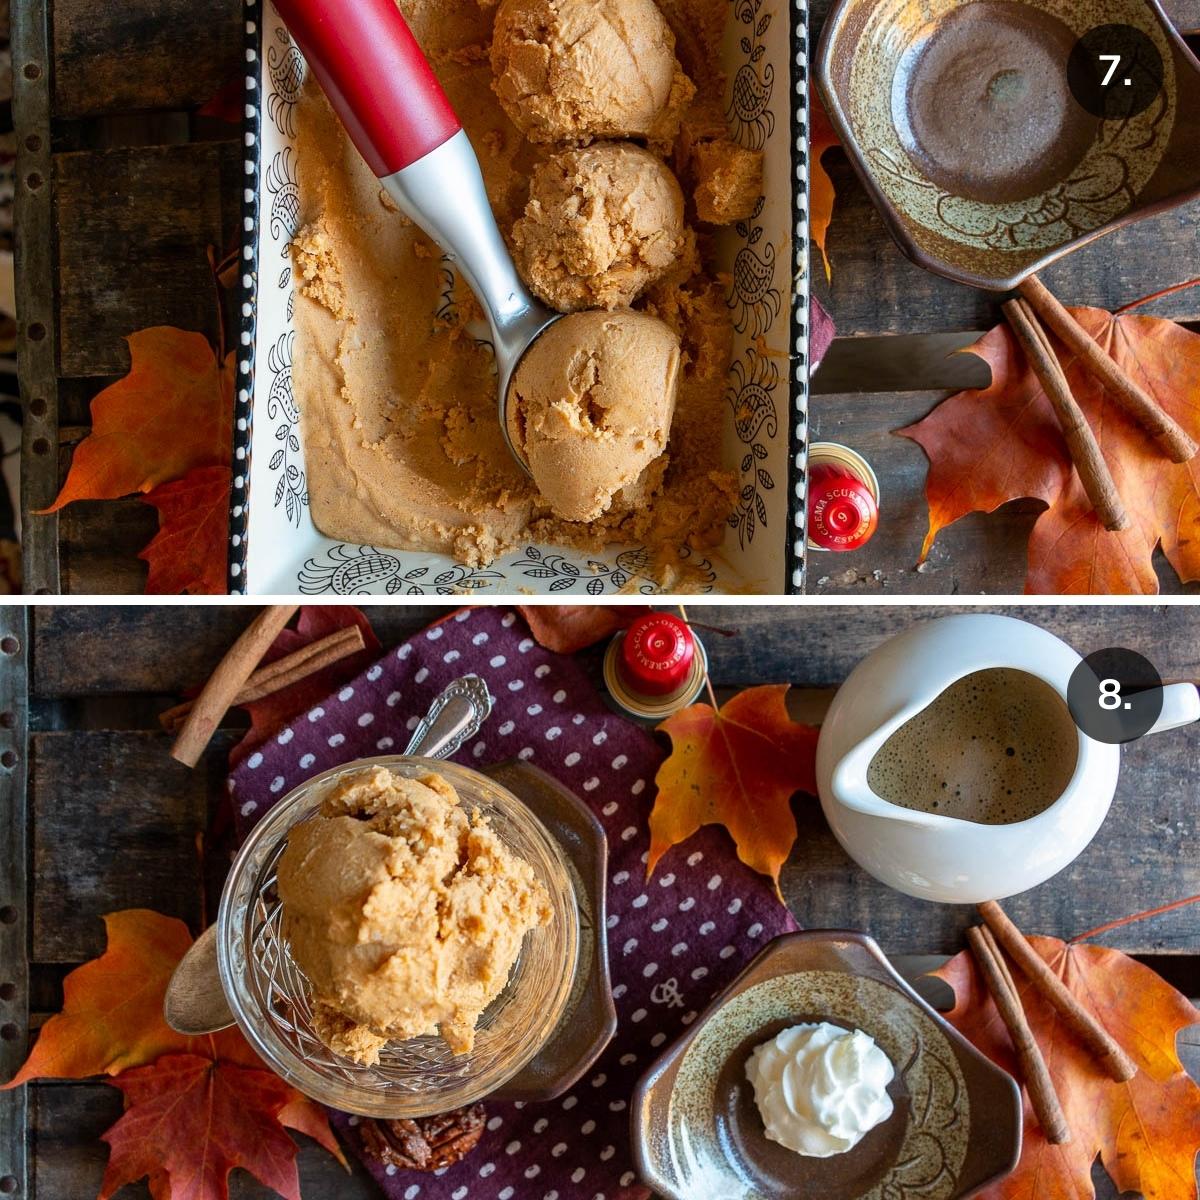 Scooping out pumpkin ice cream and placed in cups with espresso next to it. 